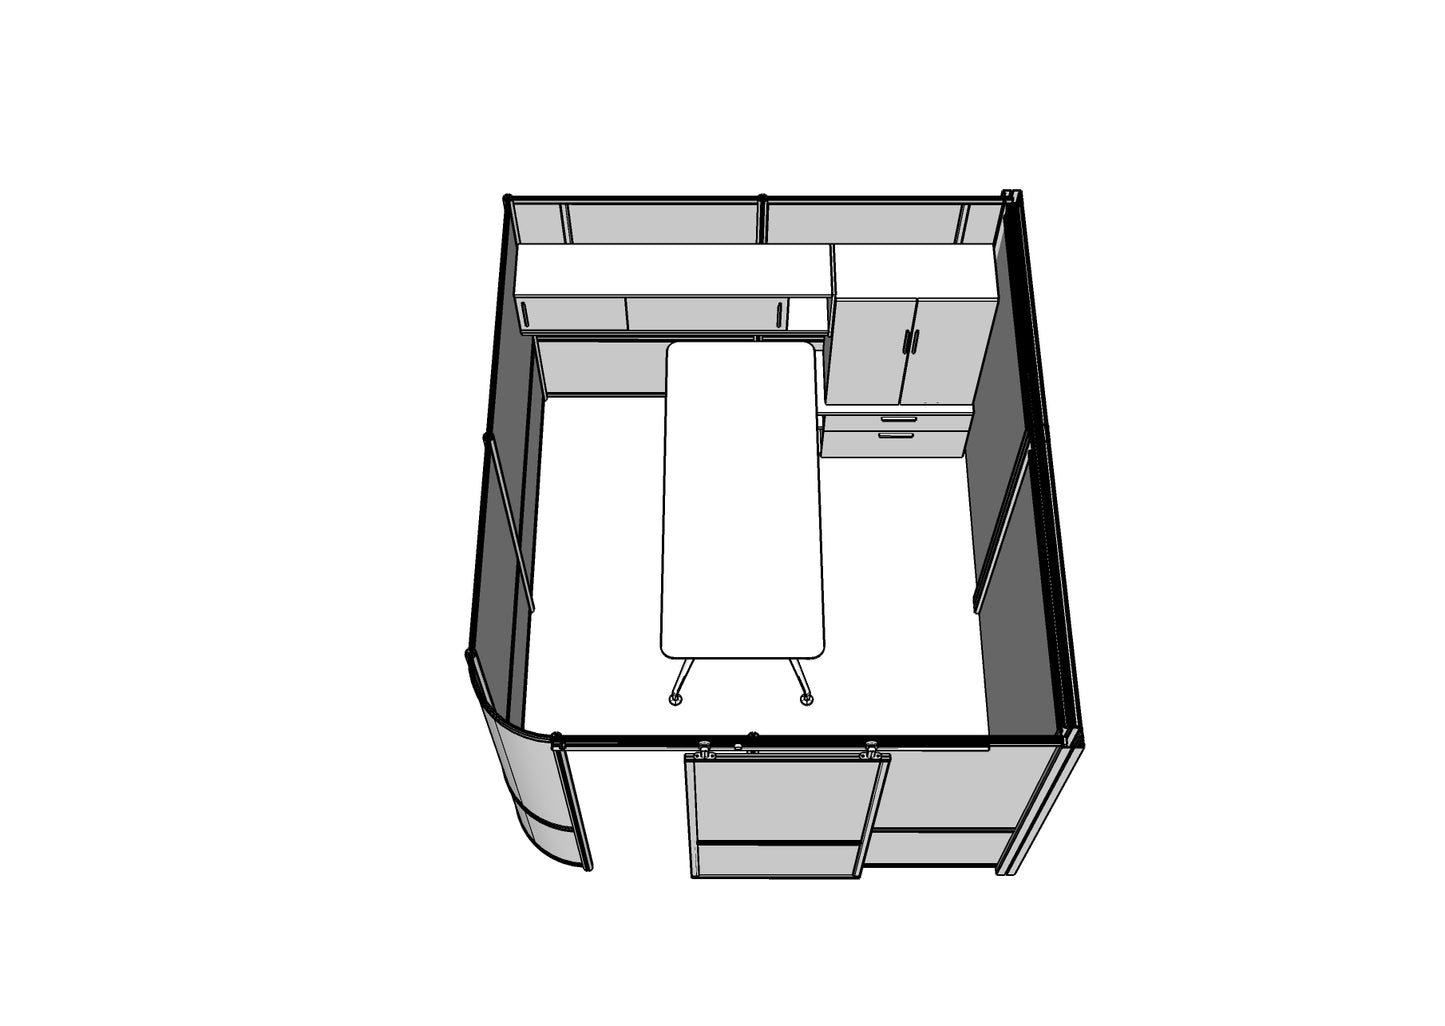 IA005 - Single Enclosed Office/Room with Curved Corner and Sliding Door